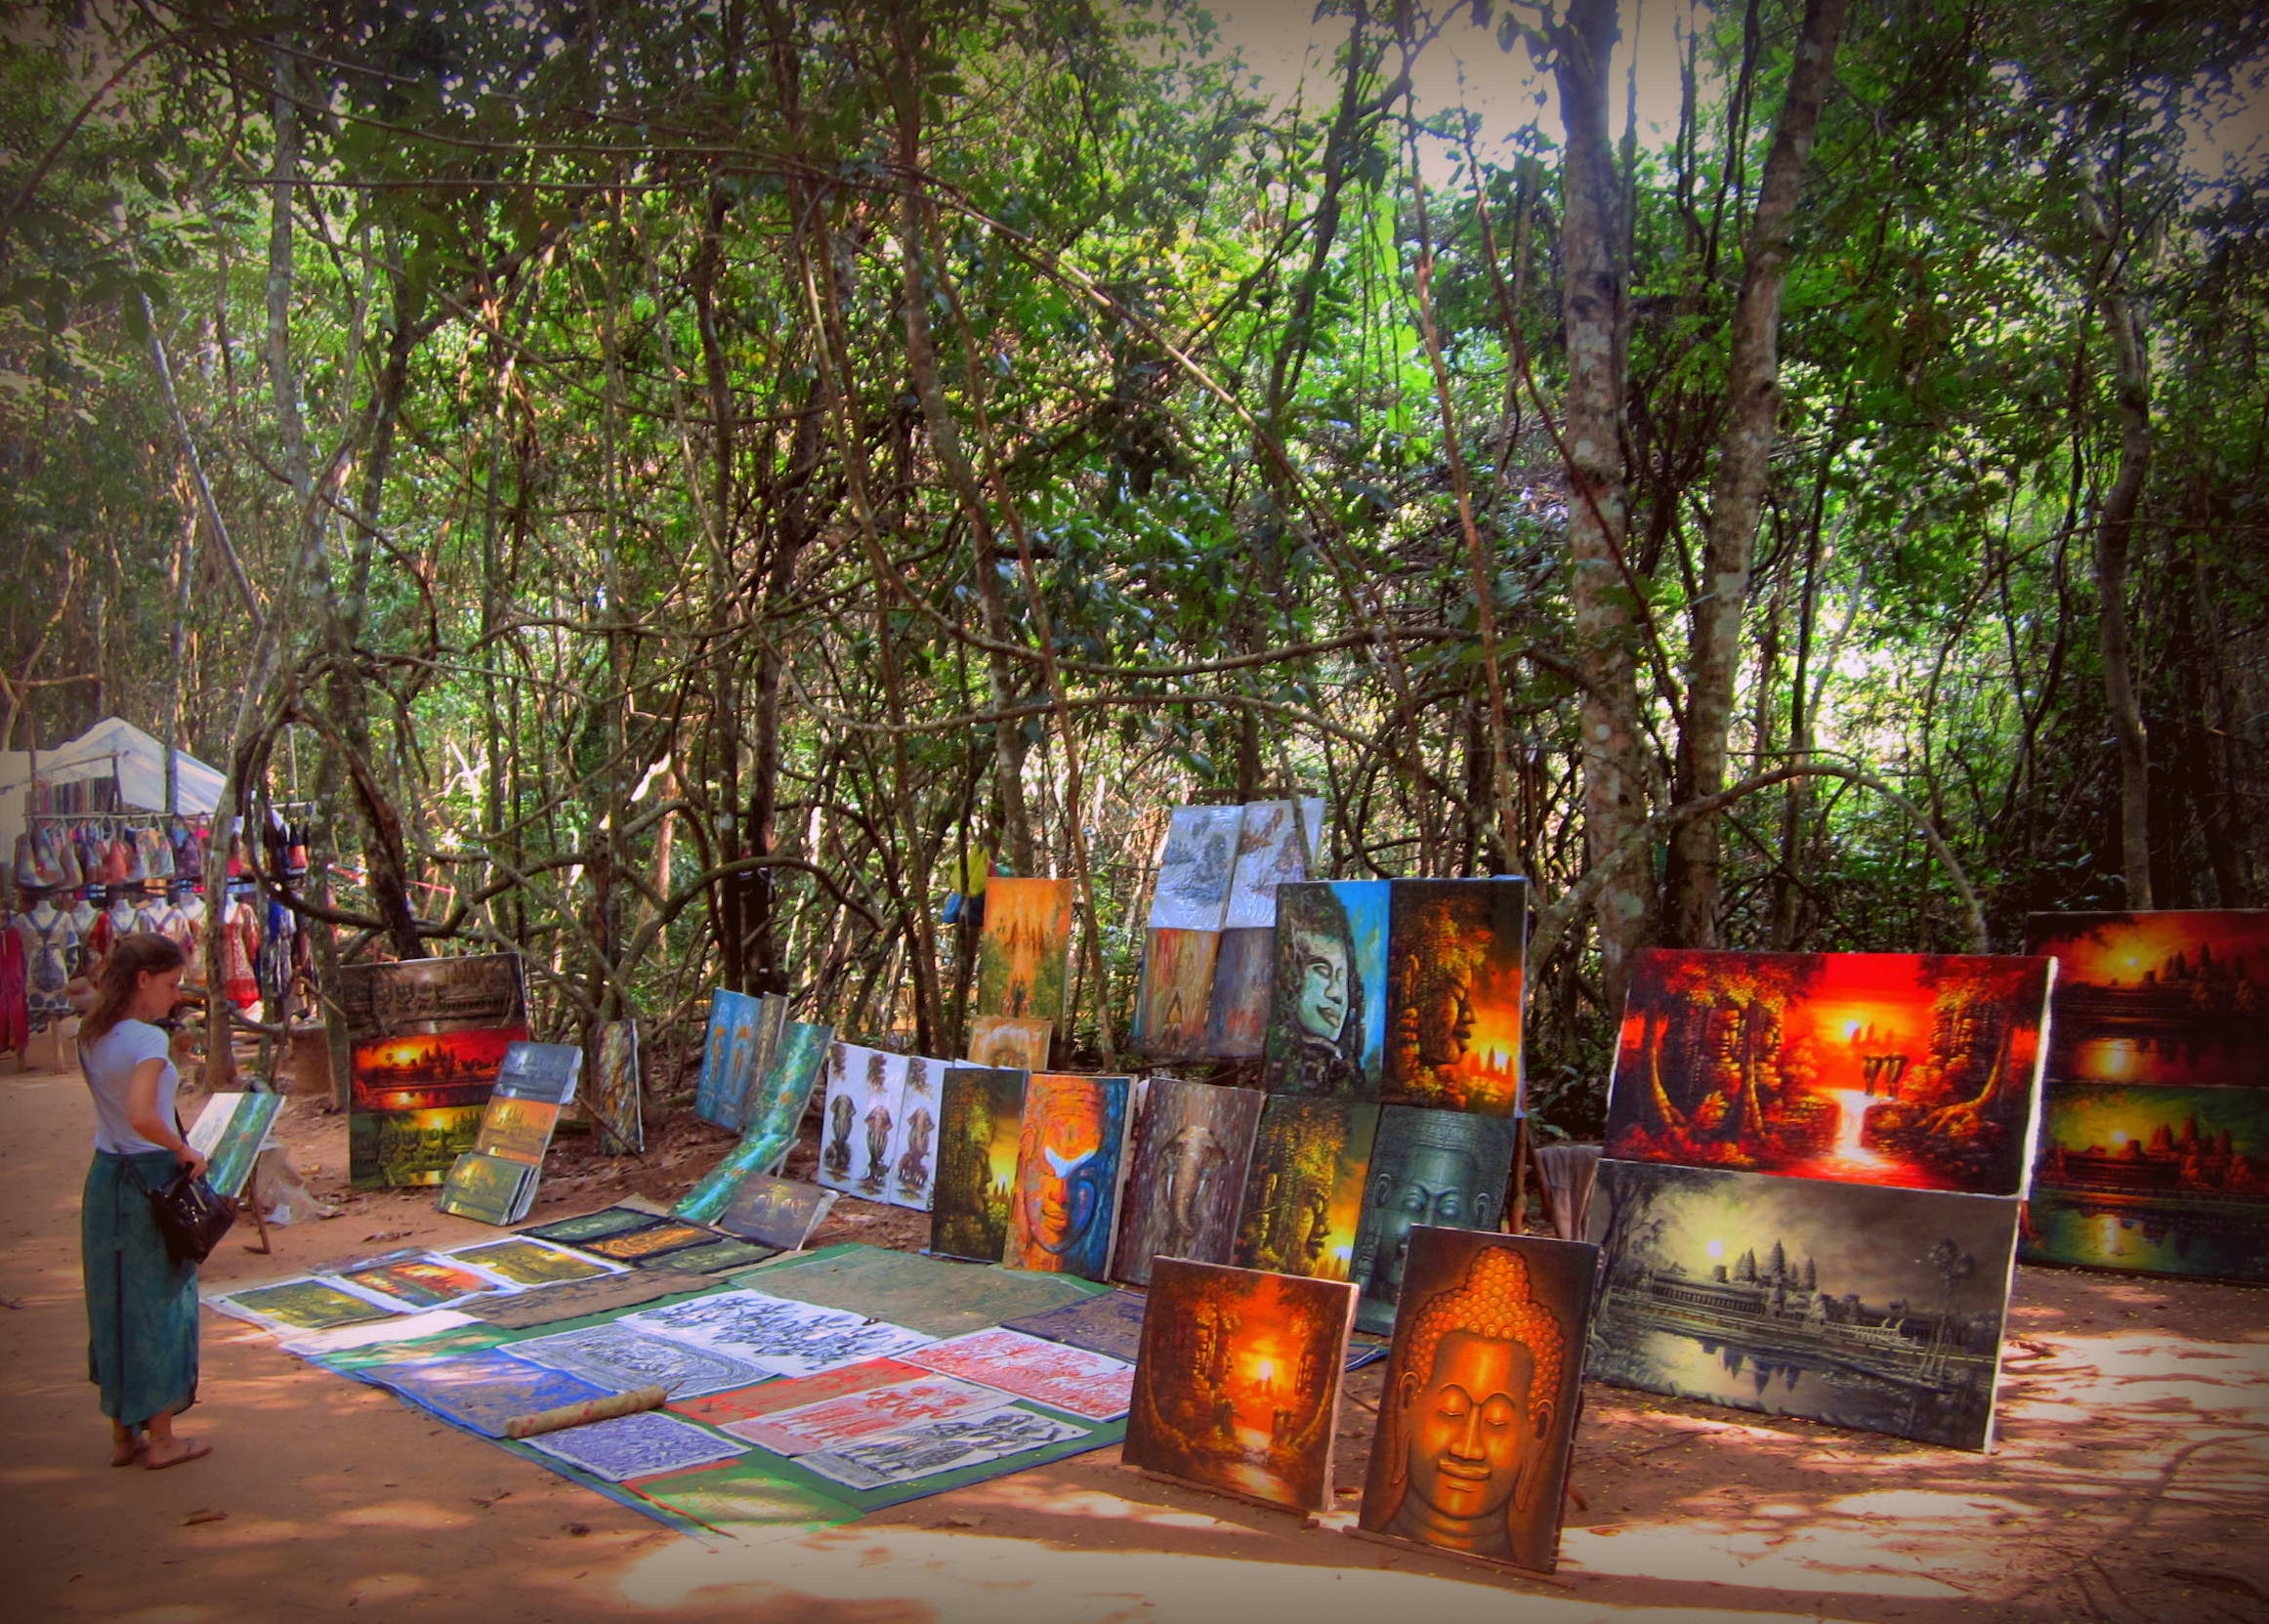 Many artists sell their paintings throughout the Angkor park, Cambodia